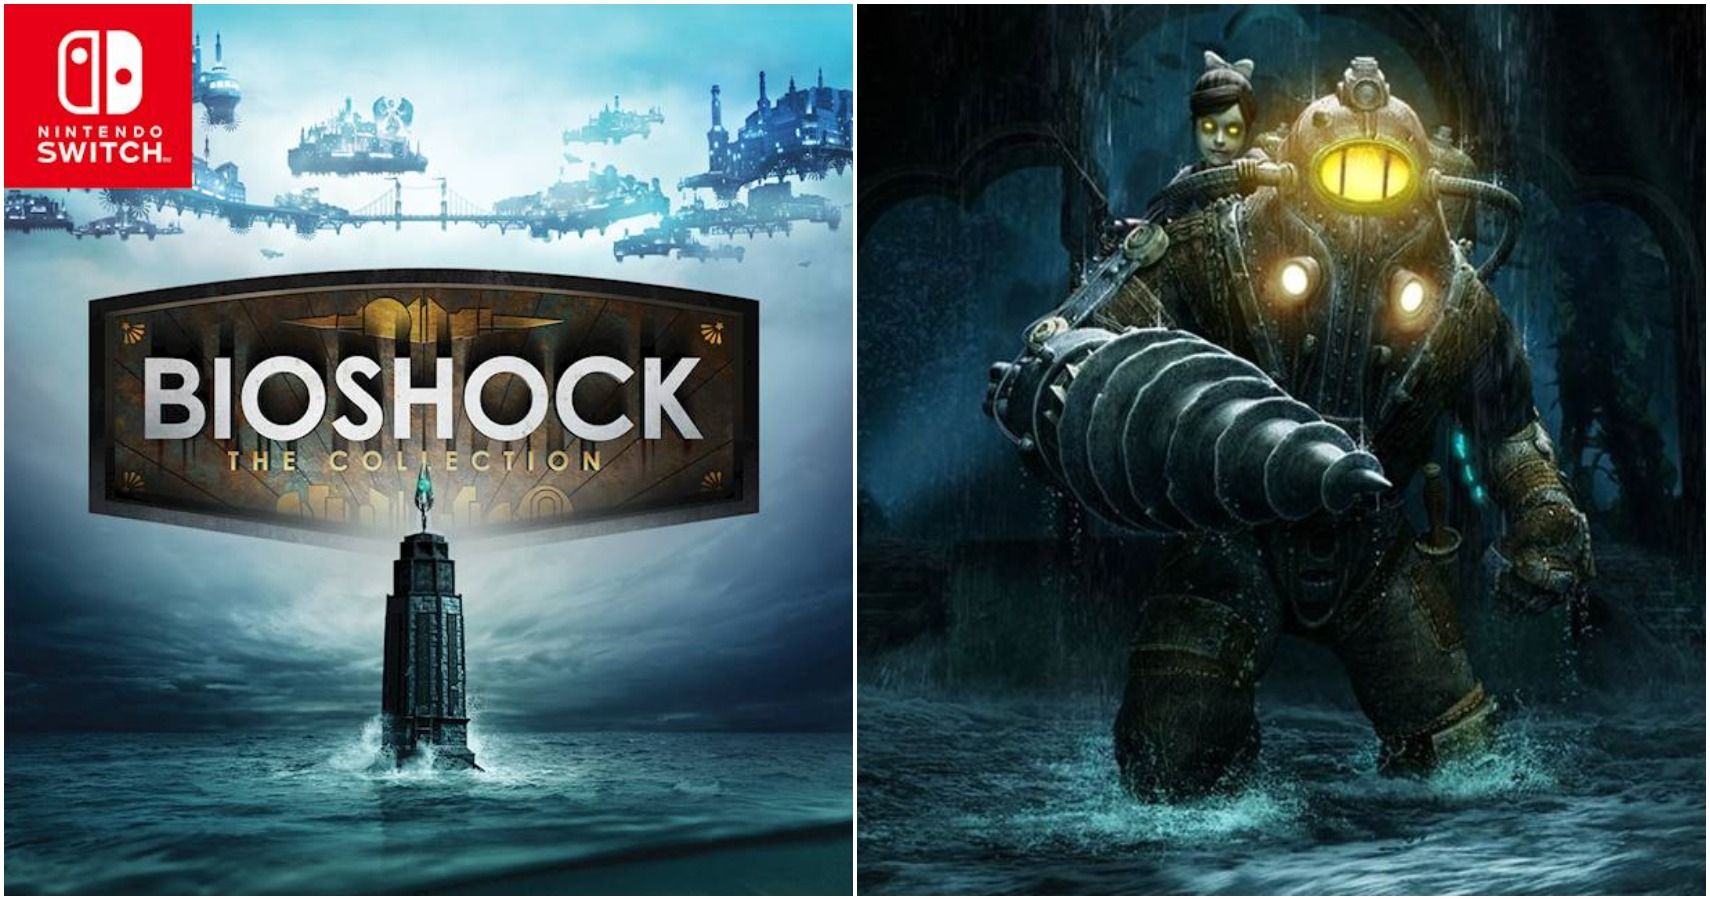 BioShock The Collection: 5 Things That Should Change With The Nintendo Switch Port (& 5 Things That Should Stay The Same)